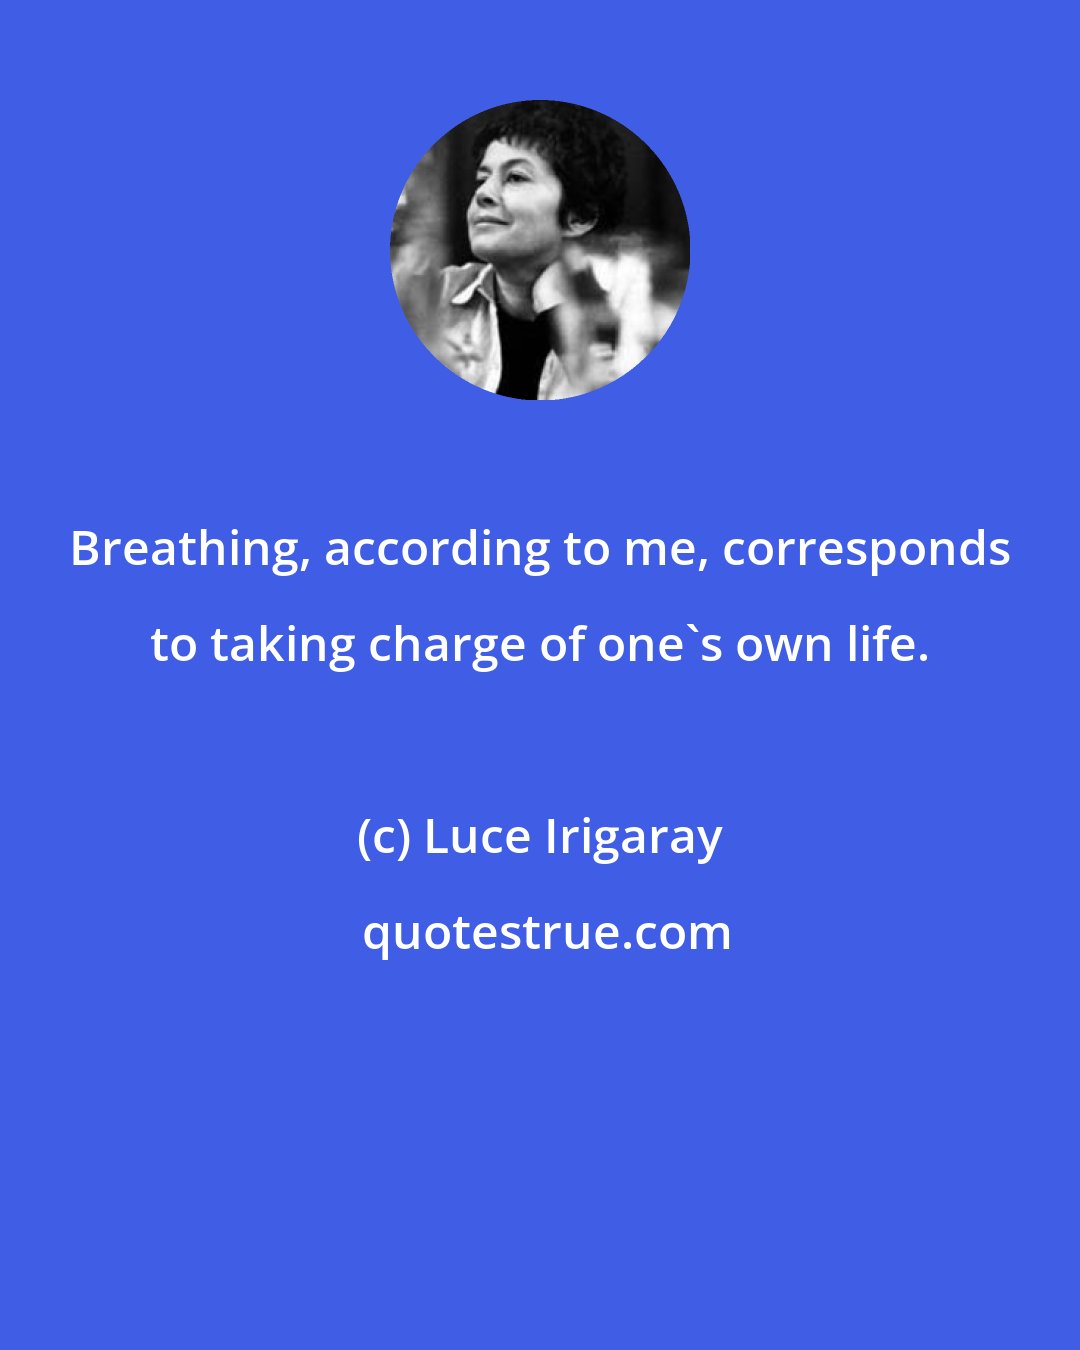 Luce Irigaray: Breathing, according to me, corresponds to taking charge of one's own life.